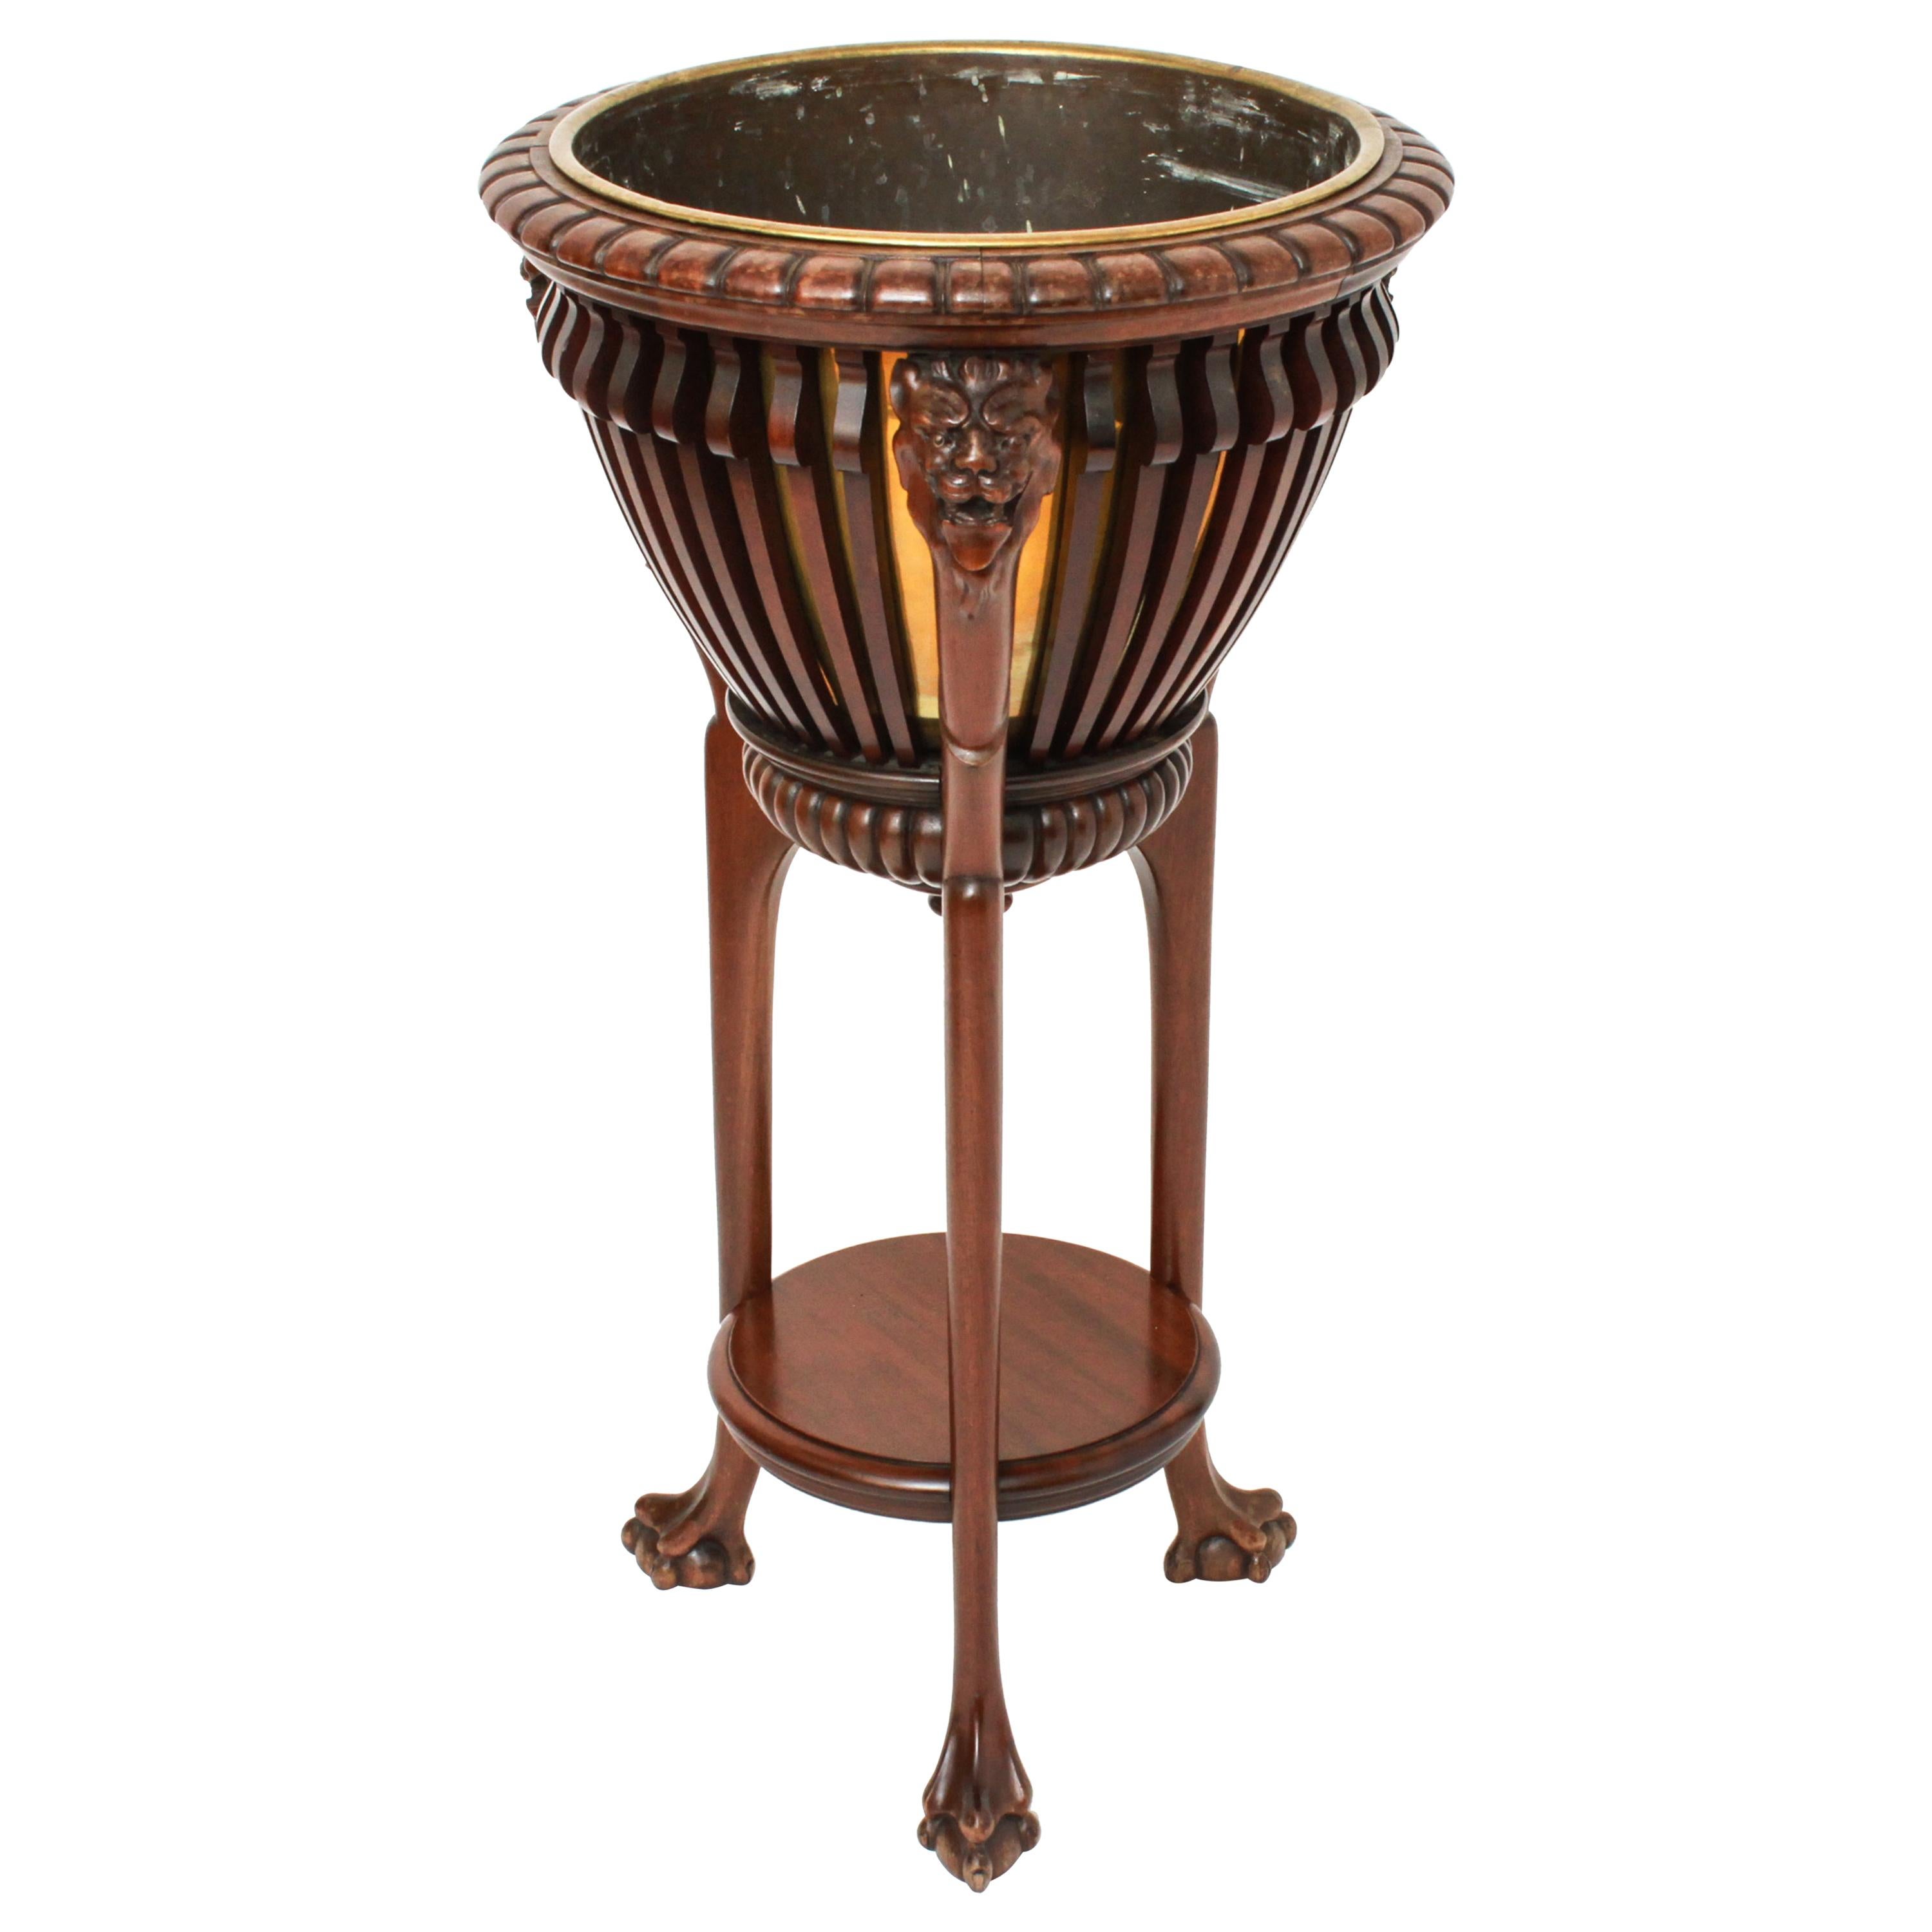 Neoclassical Style Hardwood Jardinière with Lion Motif